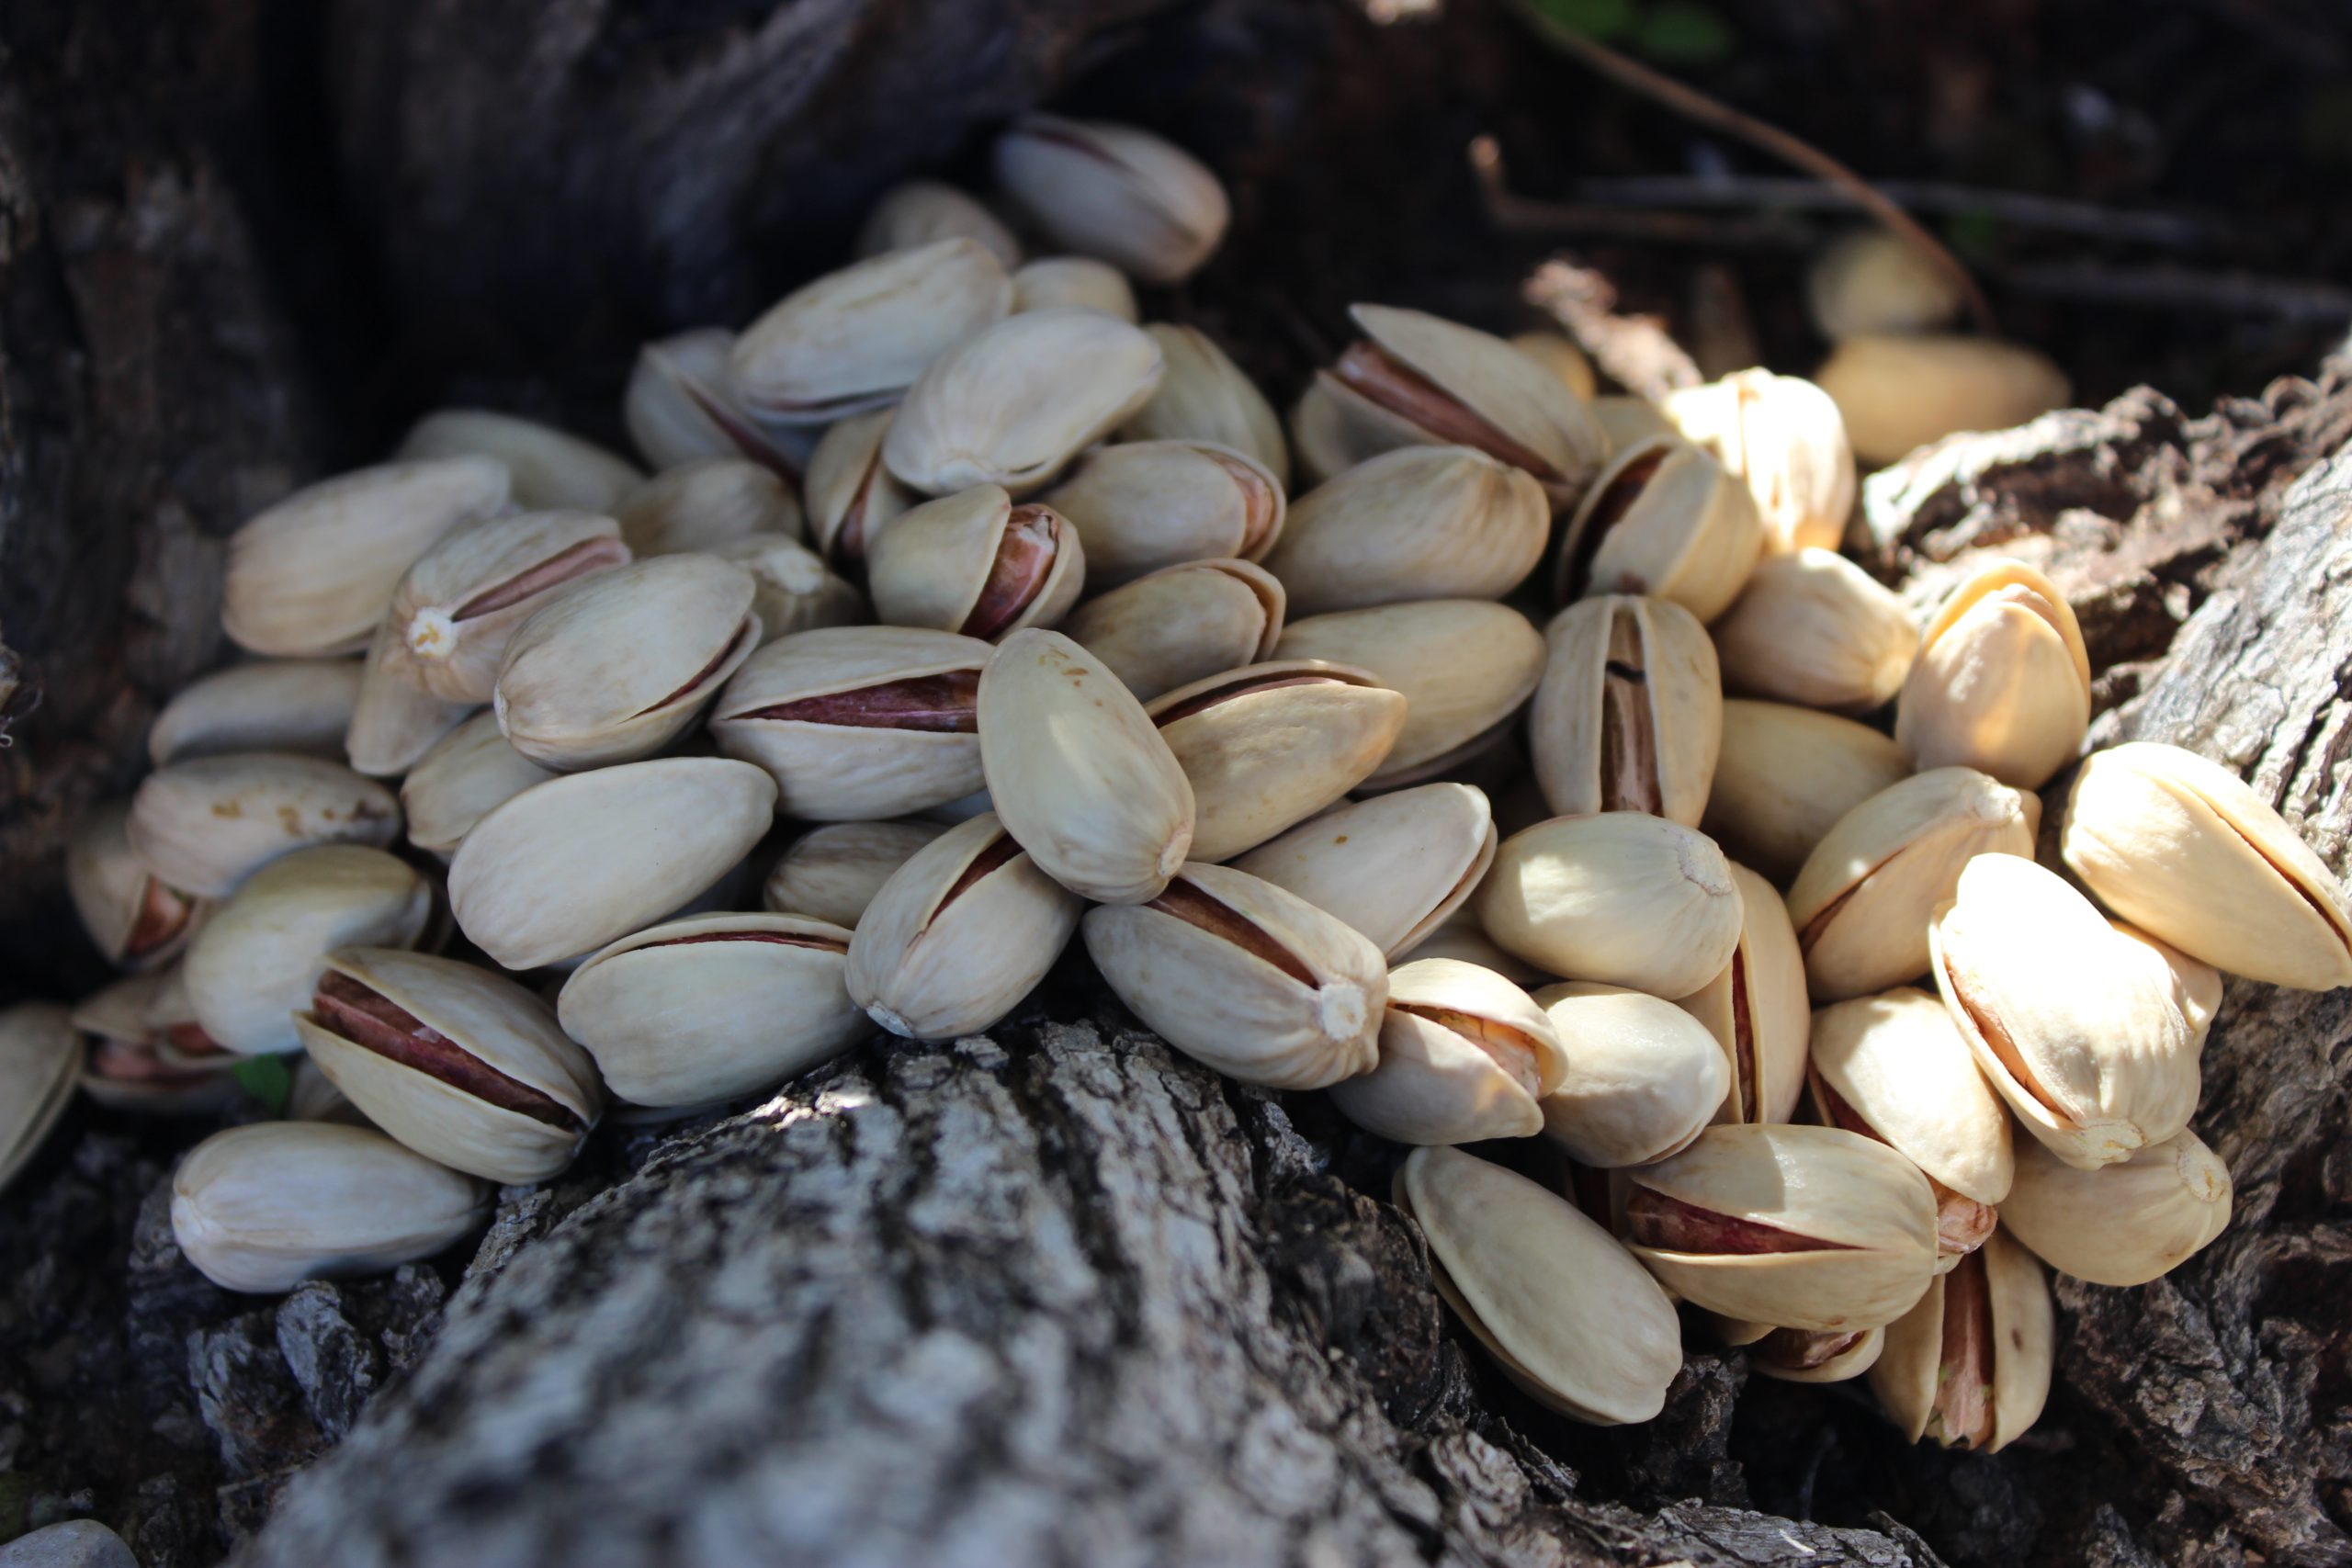 Wholesale sales of Iranian pistachios, a new product in 2021